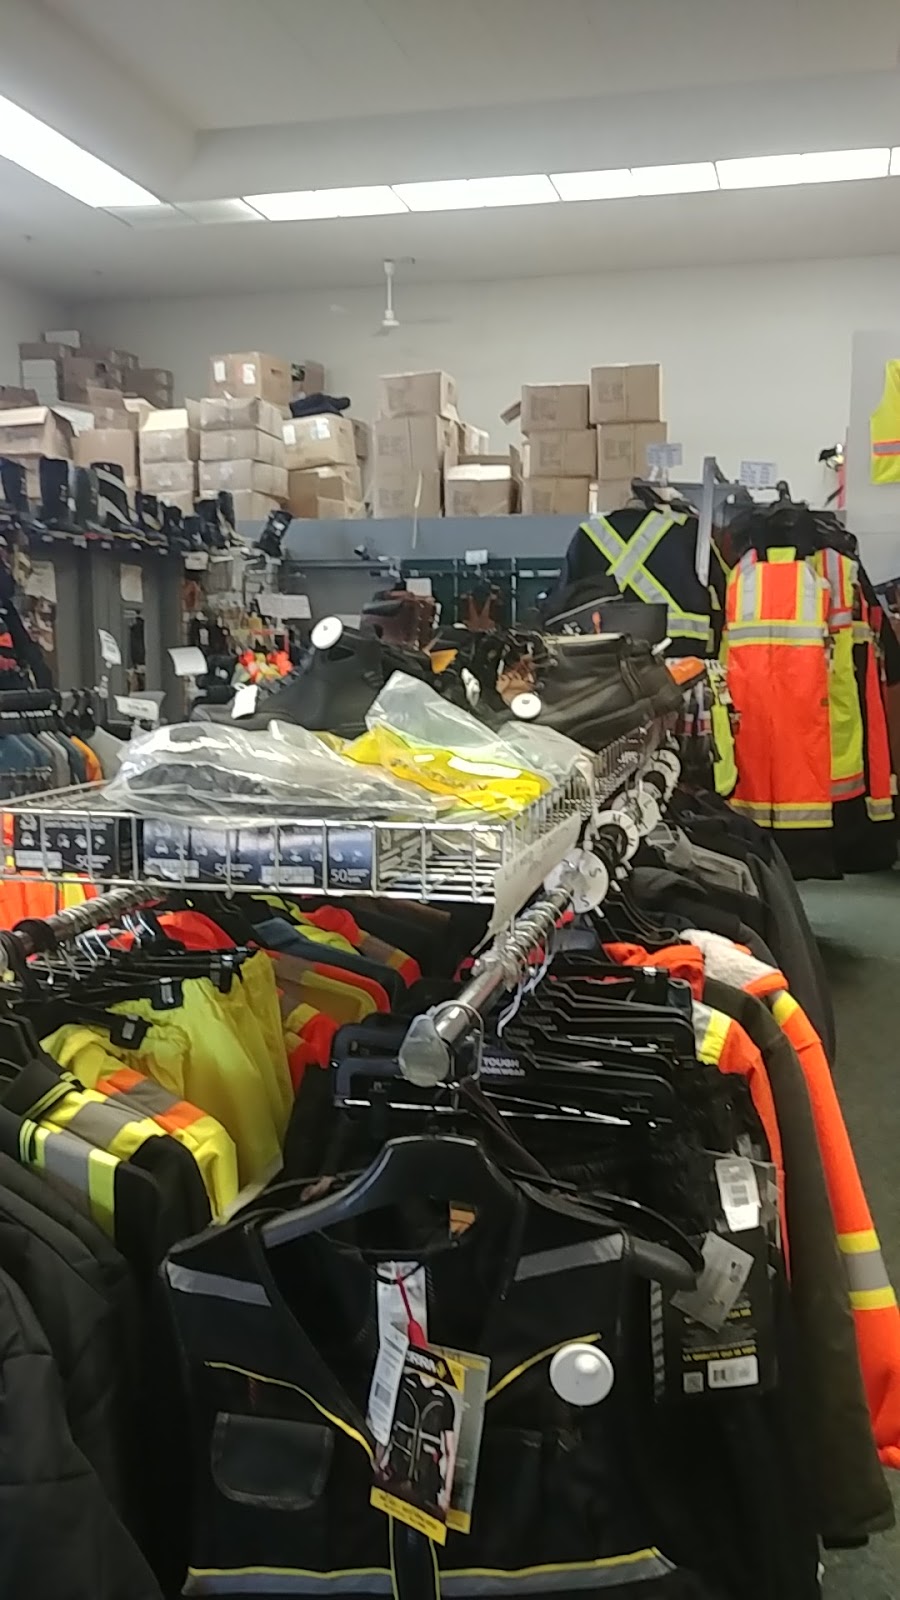 Tough Workwear Safety Store | clothing store | 978 Notre Dame Ave, Winnipeg, MB R3E 0N3, Canada | 2047756498 OR +1 204-775-6498